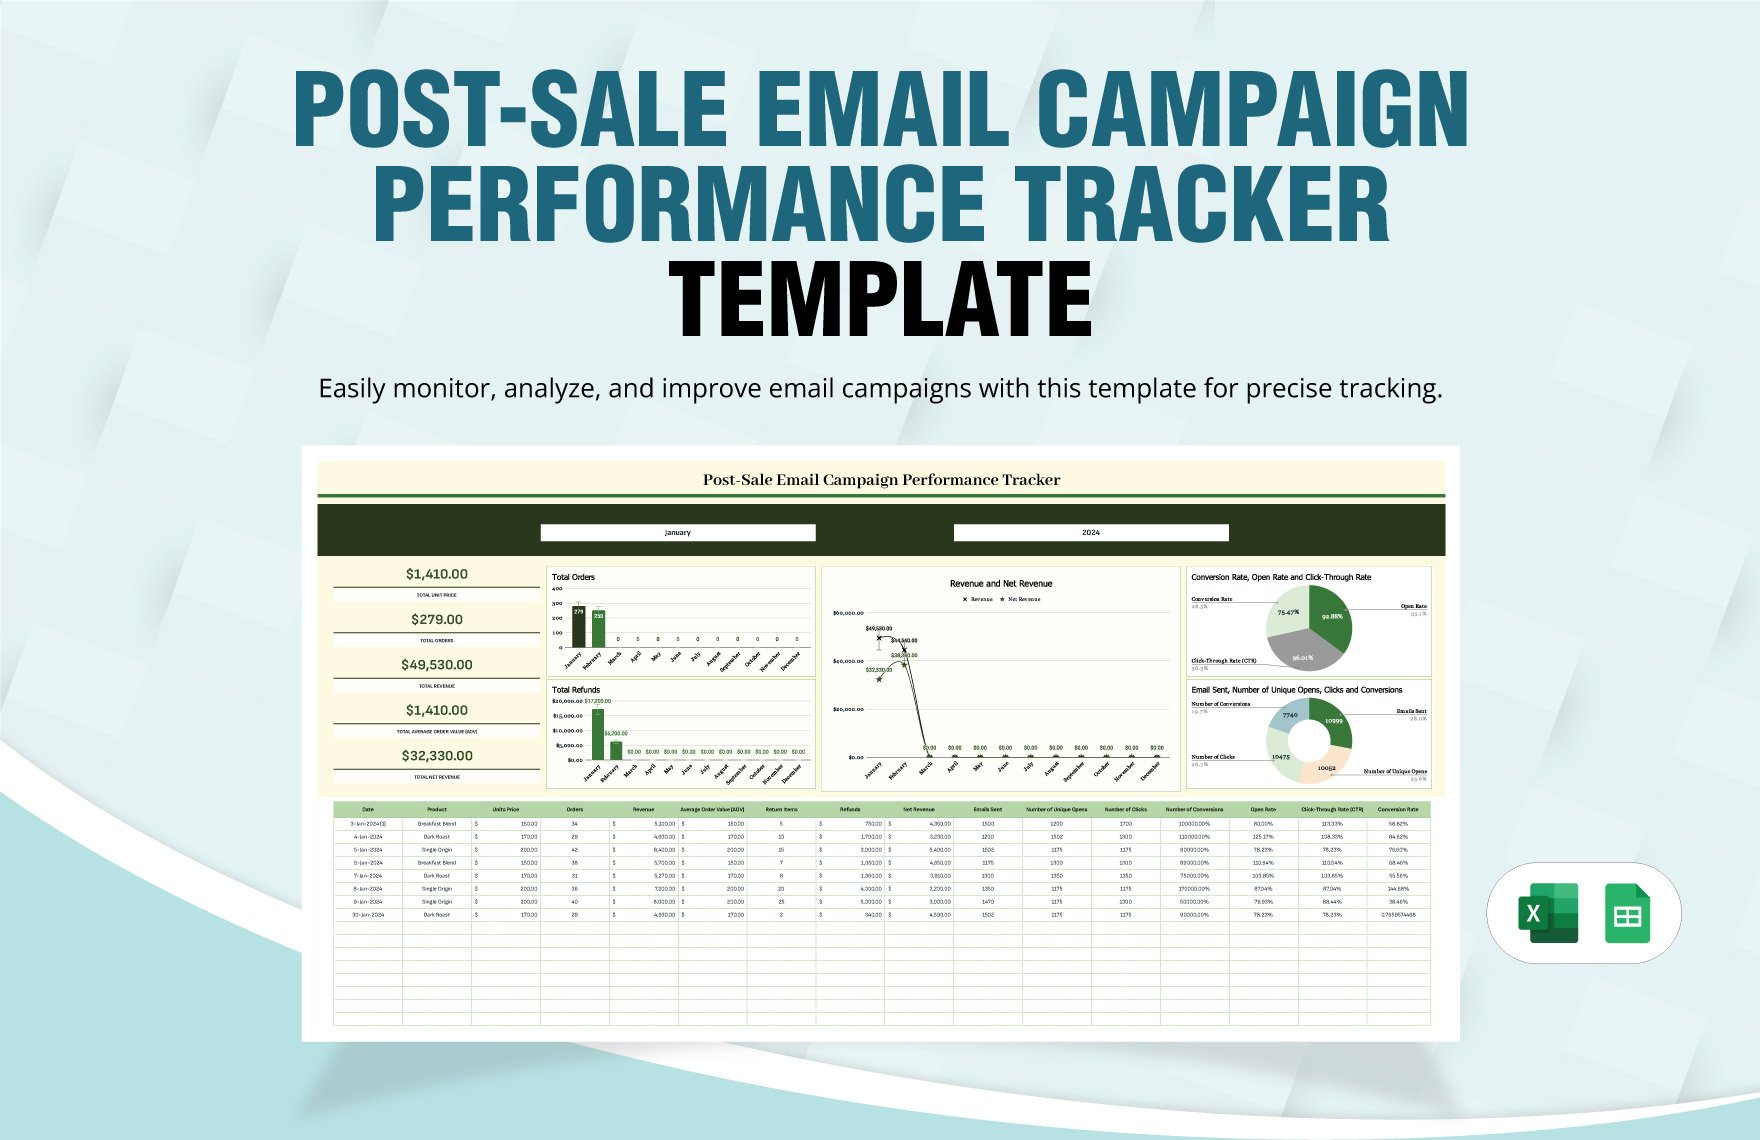 Post-Sale Email Campaign Performance Tracker Template